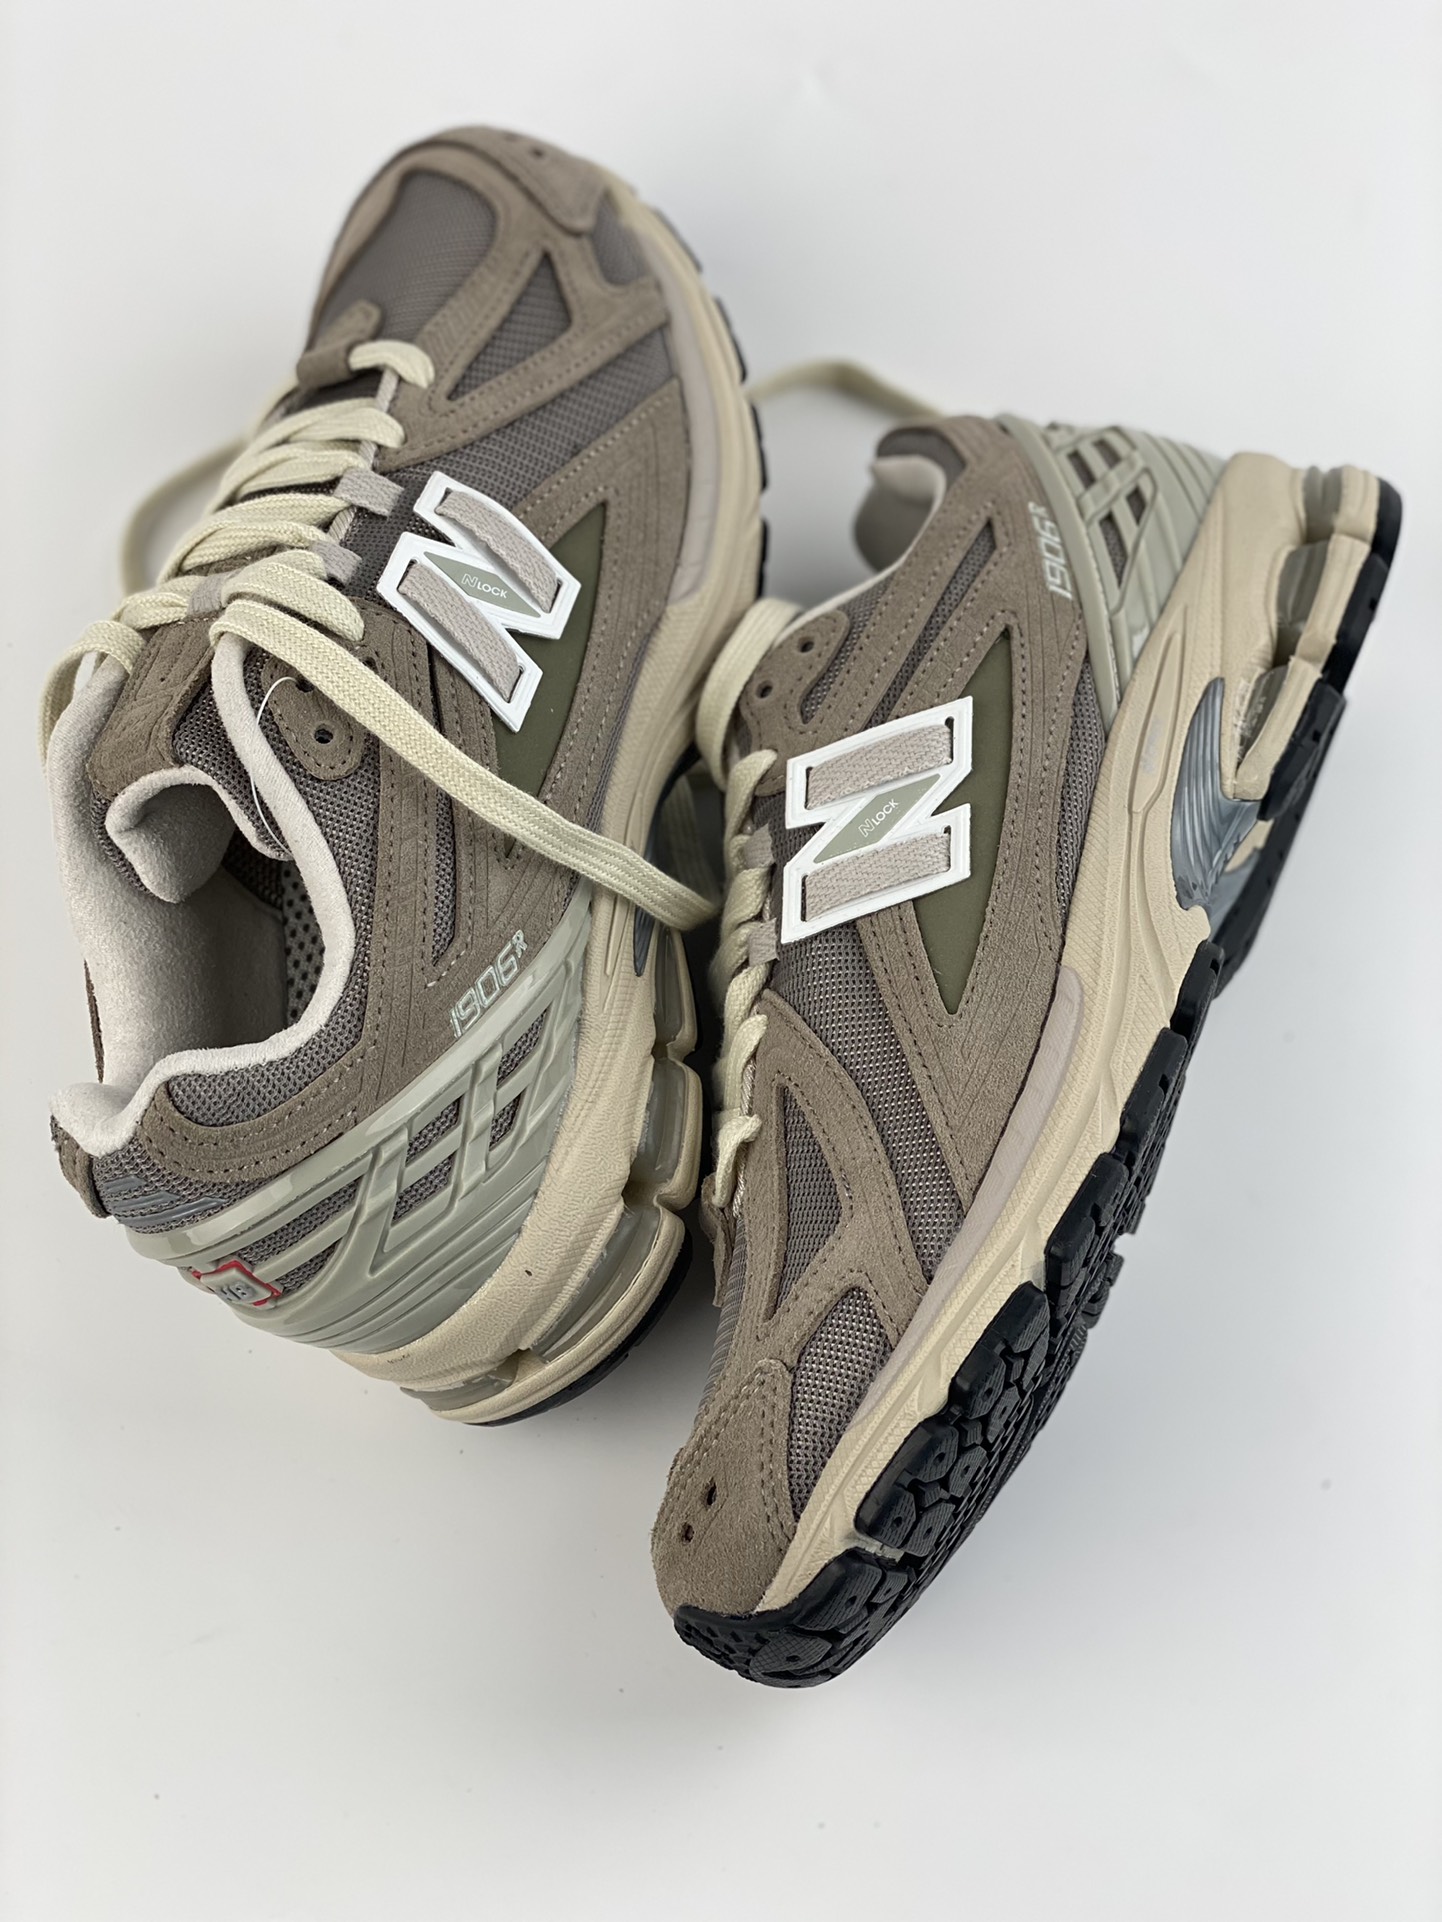 New Balance 1906 series retro dad style casual sports running shoes M1906RL